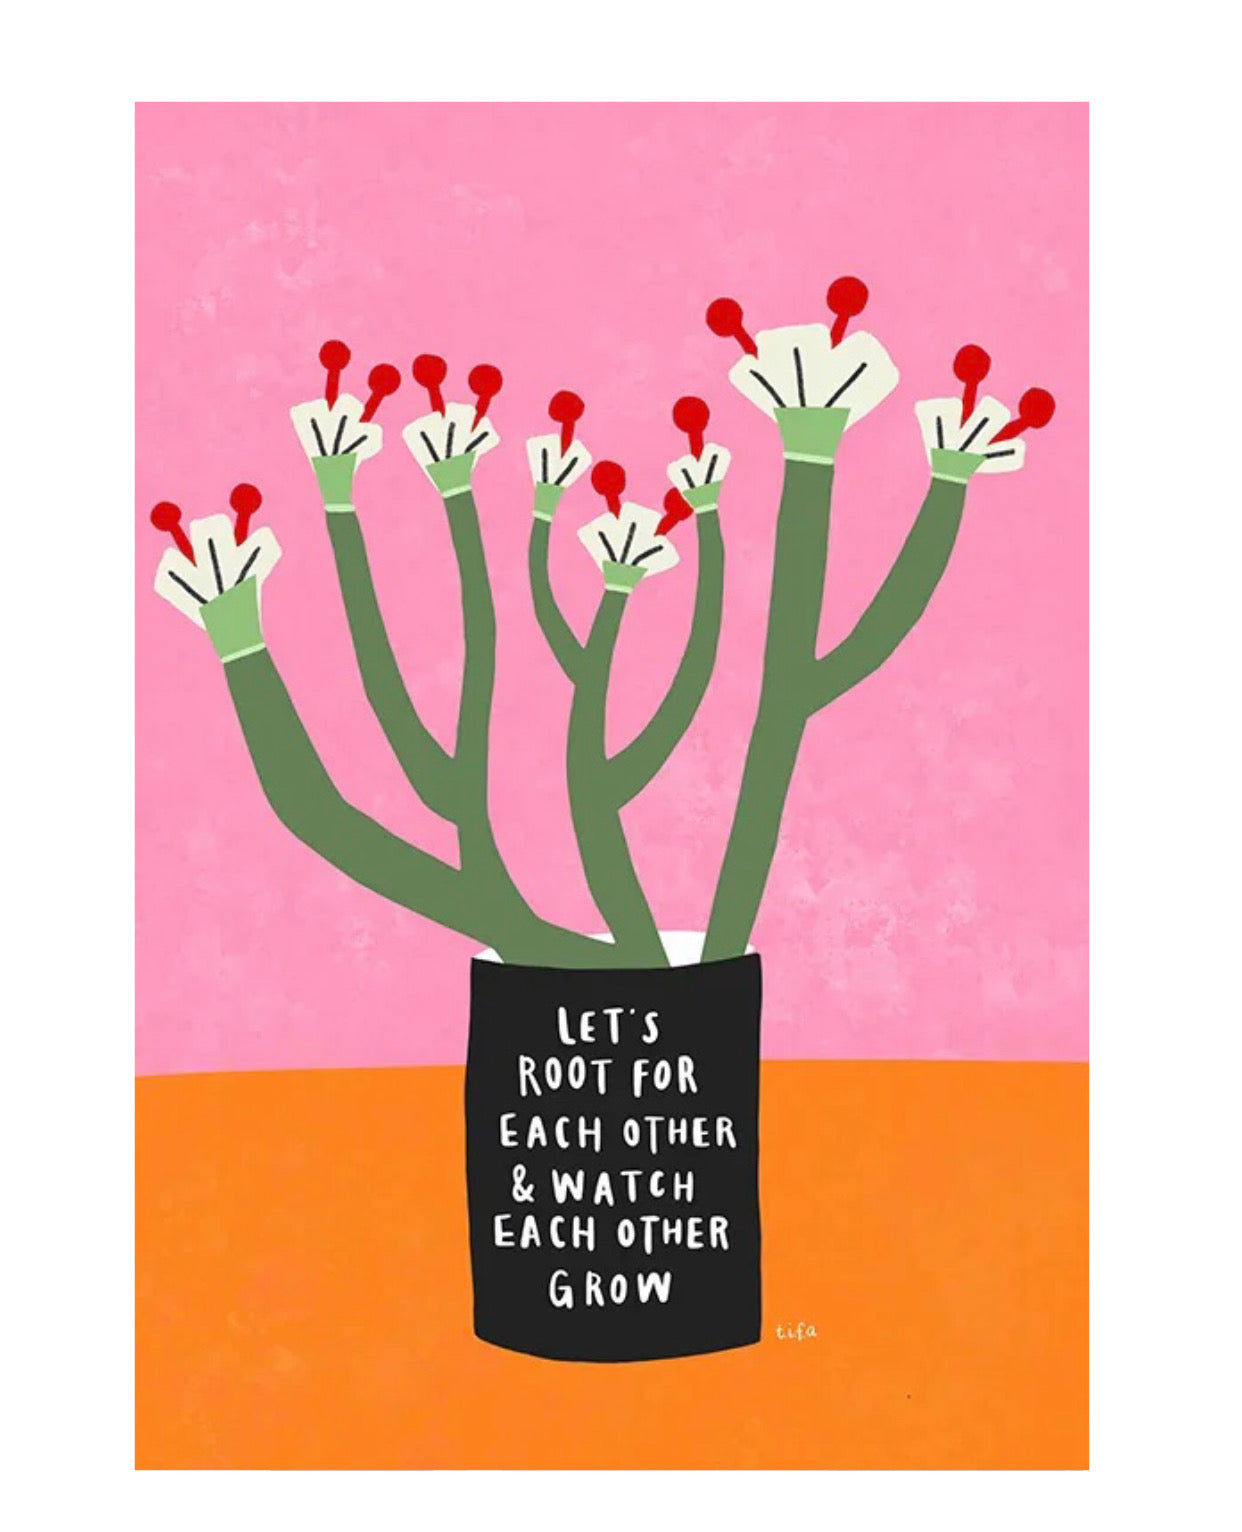 "let's root for each other grow" poster